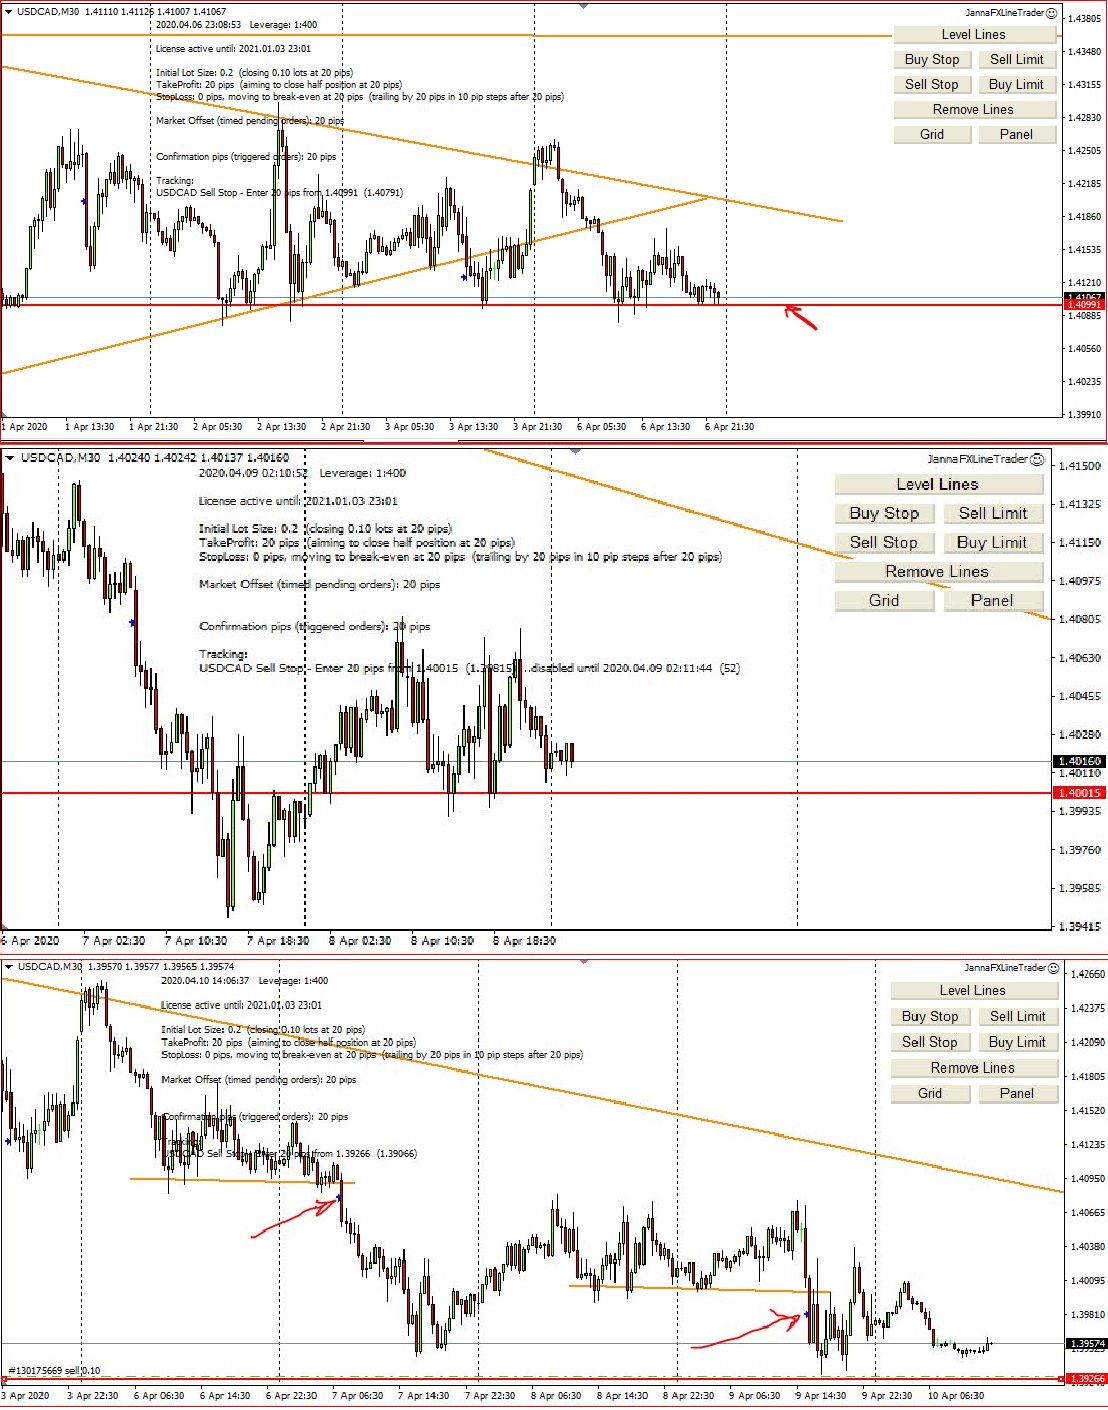 Forex Trading Results and Forecast 12th-17th April 2020